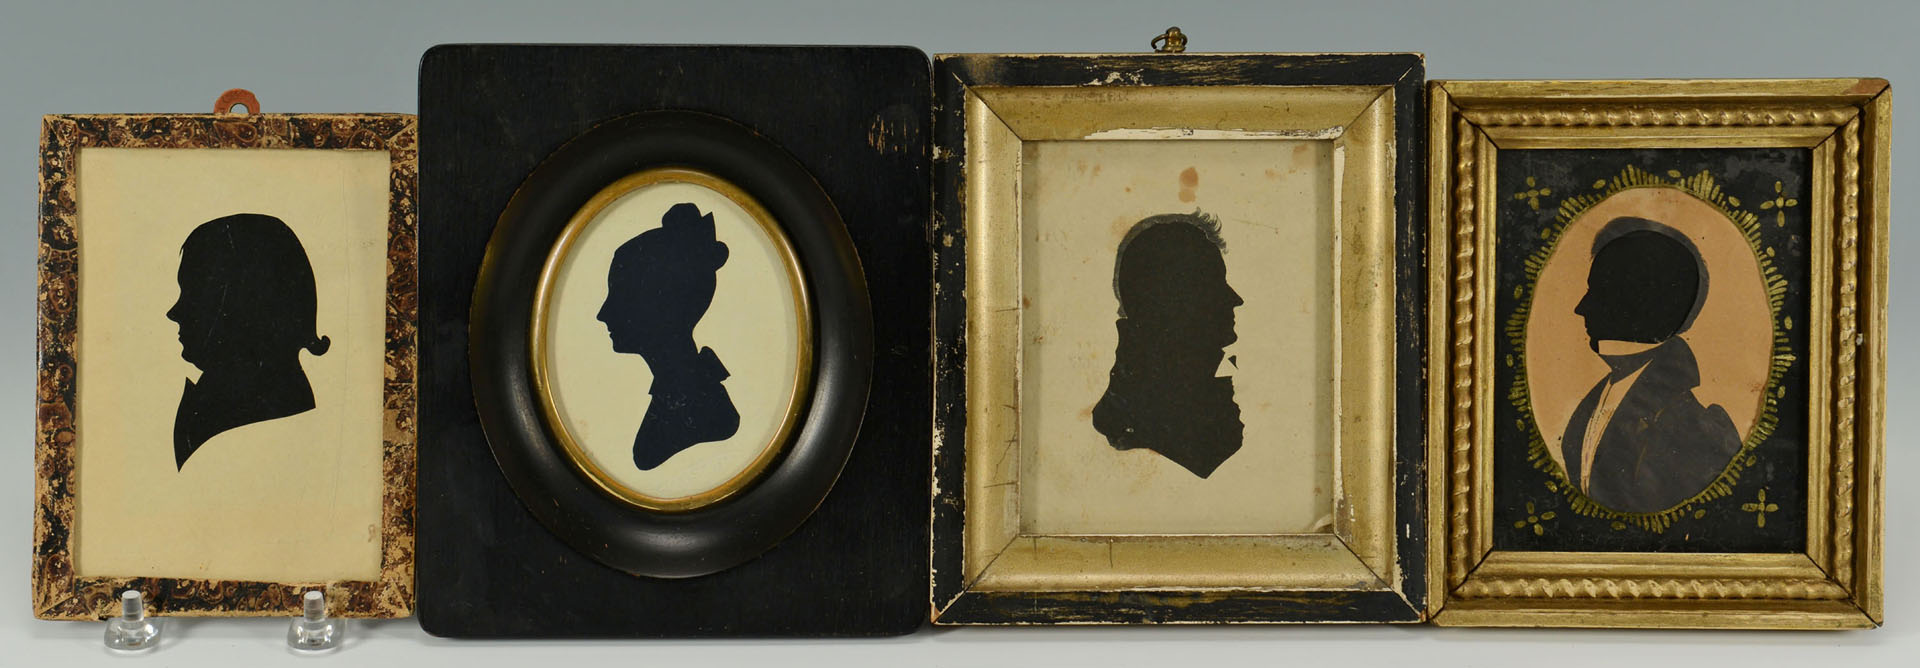 Lot 223: Four 19th c. Silhouettes, 3 Gents and 1 Woman